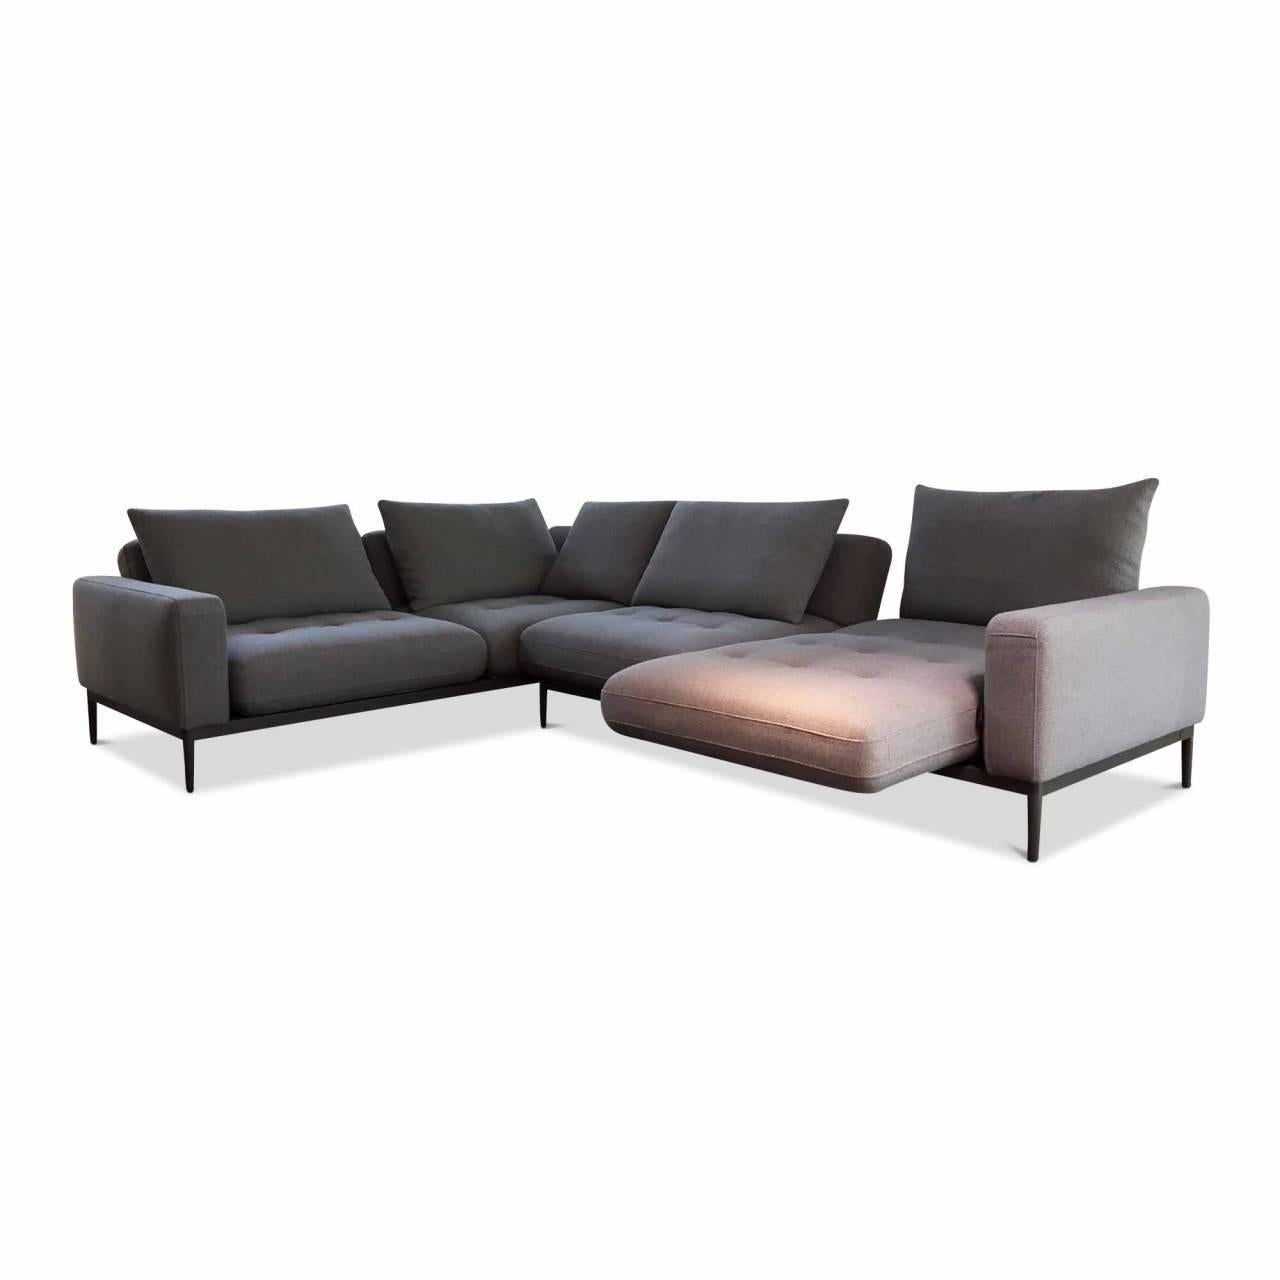 We are delighted to present to you the aesthetic sofa 